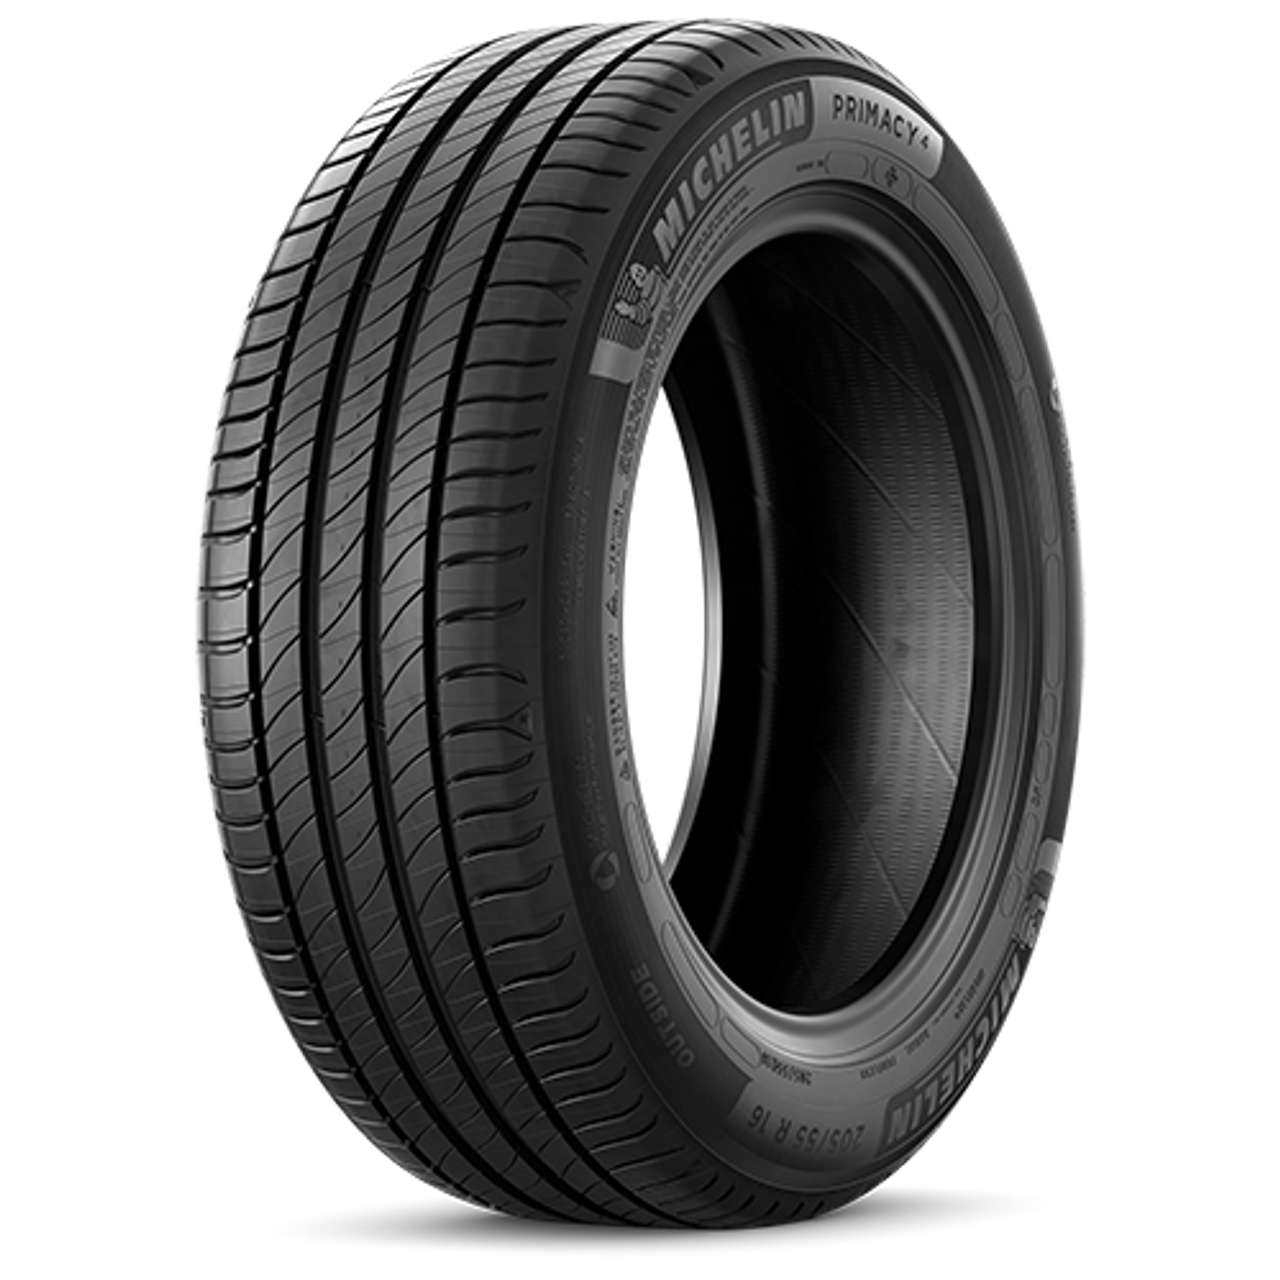 MICHELIN PRIMACY 4+ 225/65R17 102H BSW